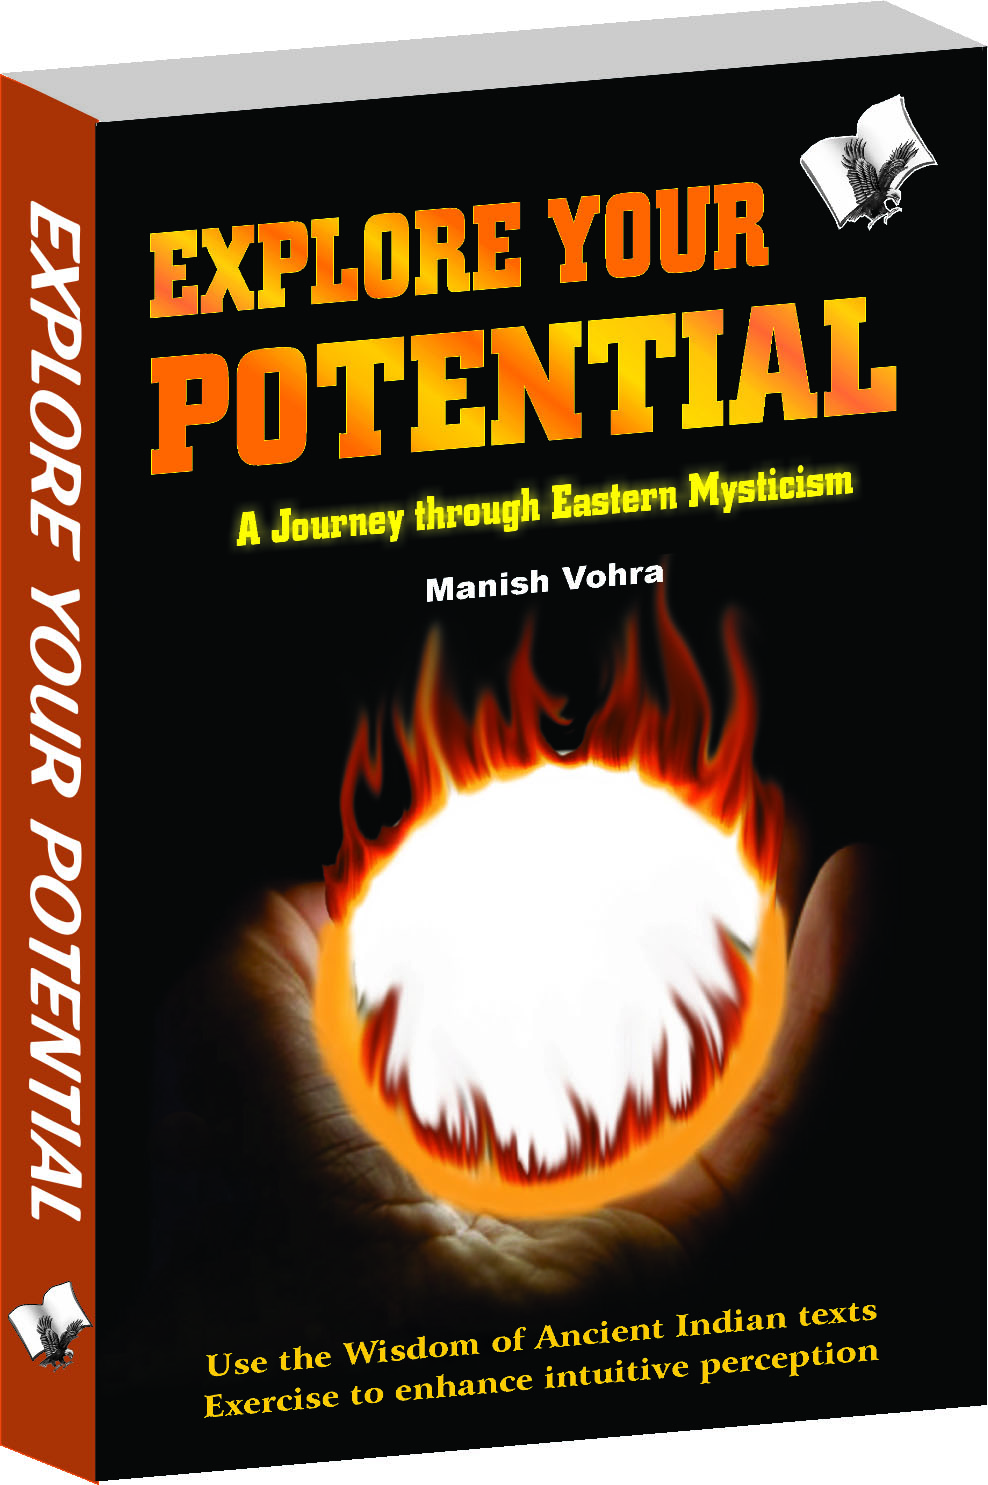 Explore Your Potential -A journey through eastern mysticism